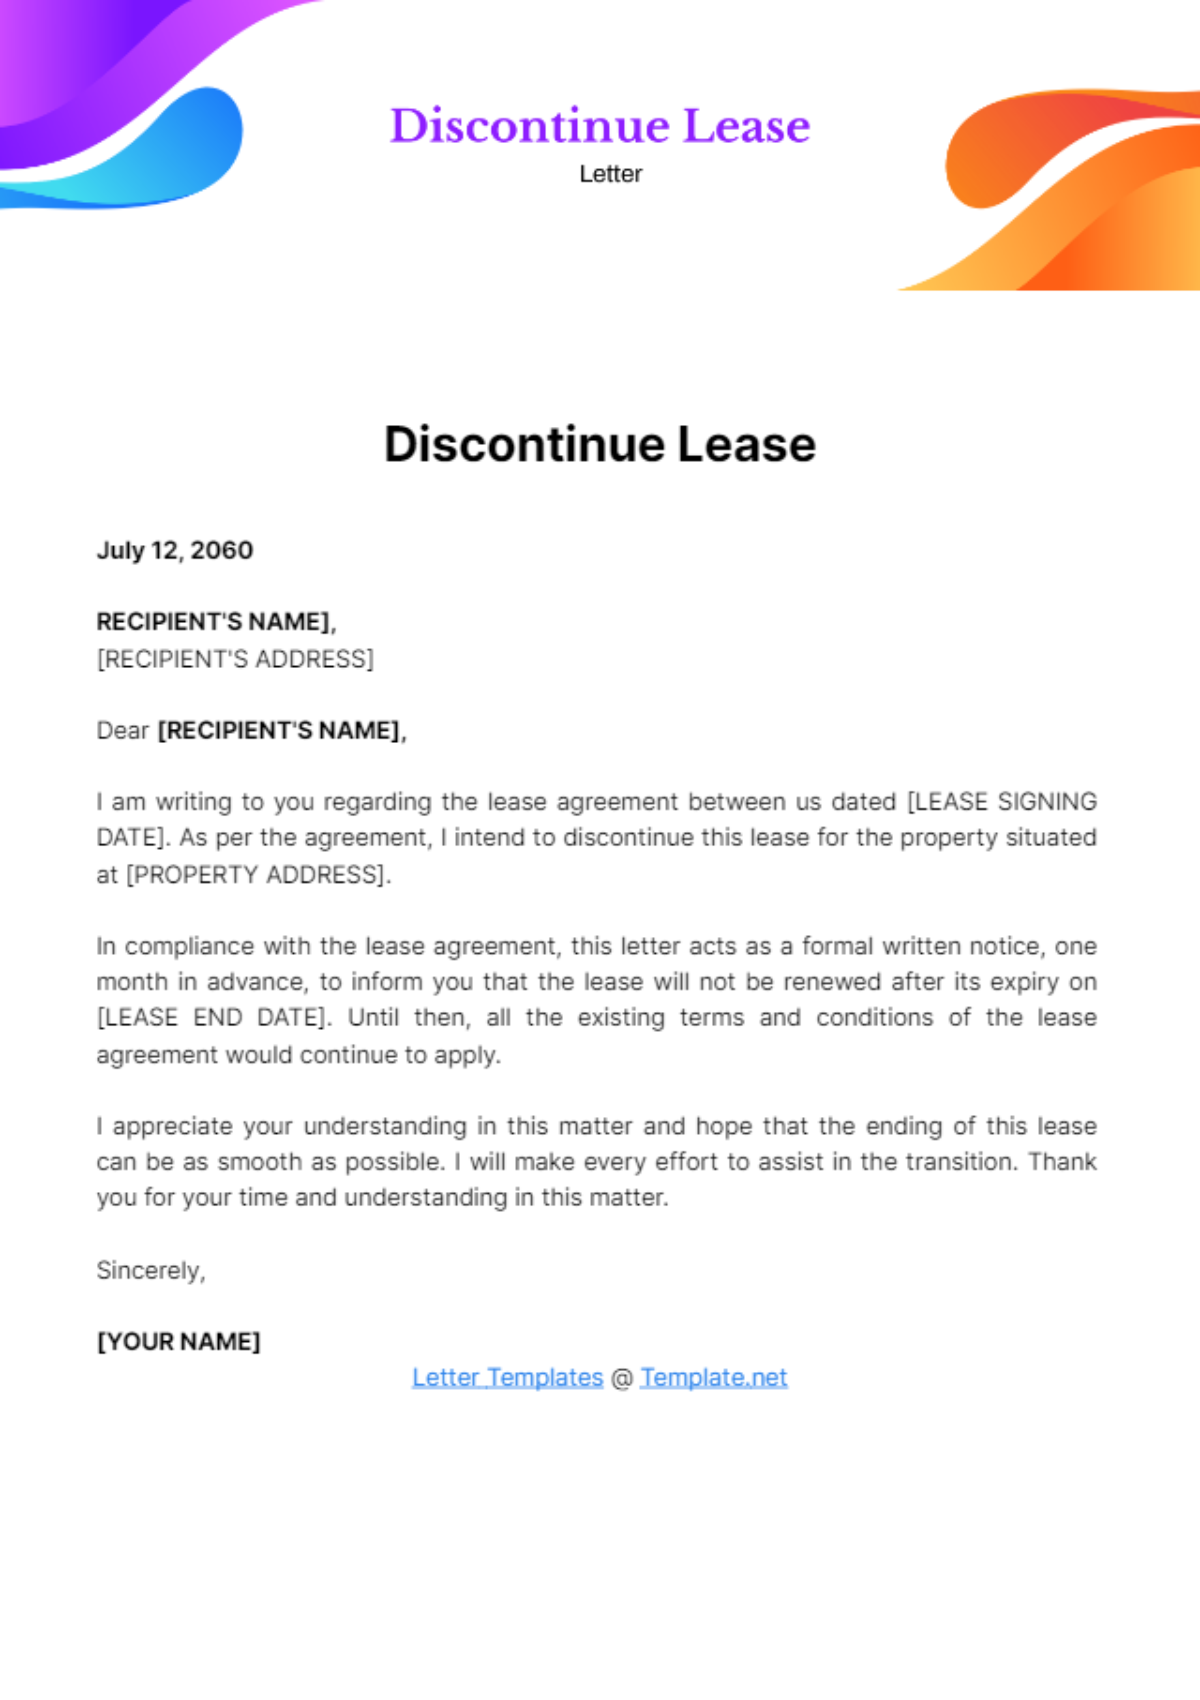 Free Discontinue Lease Letter Template